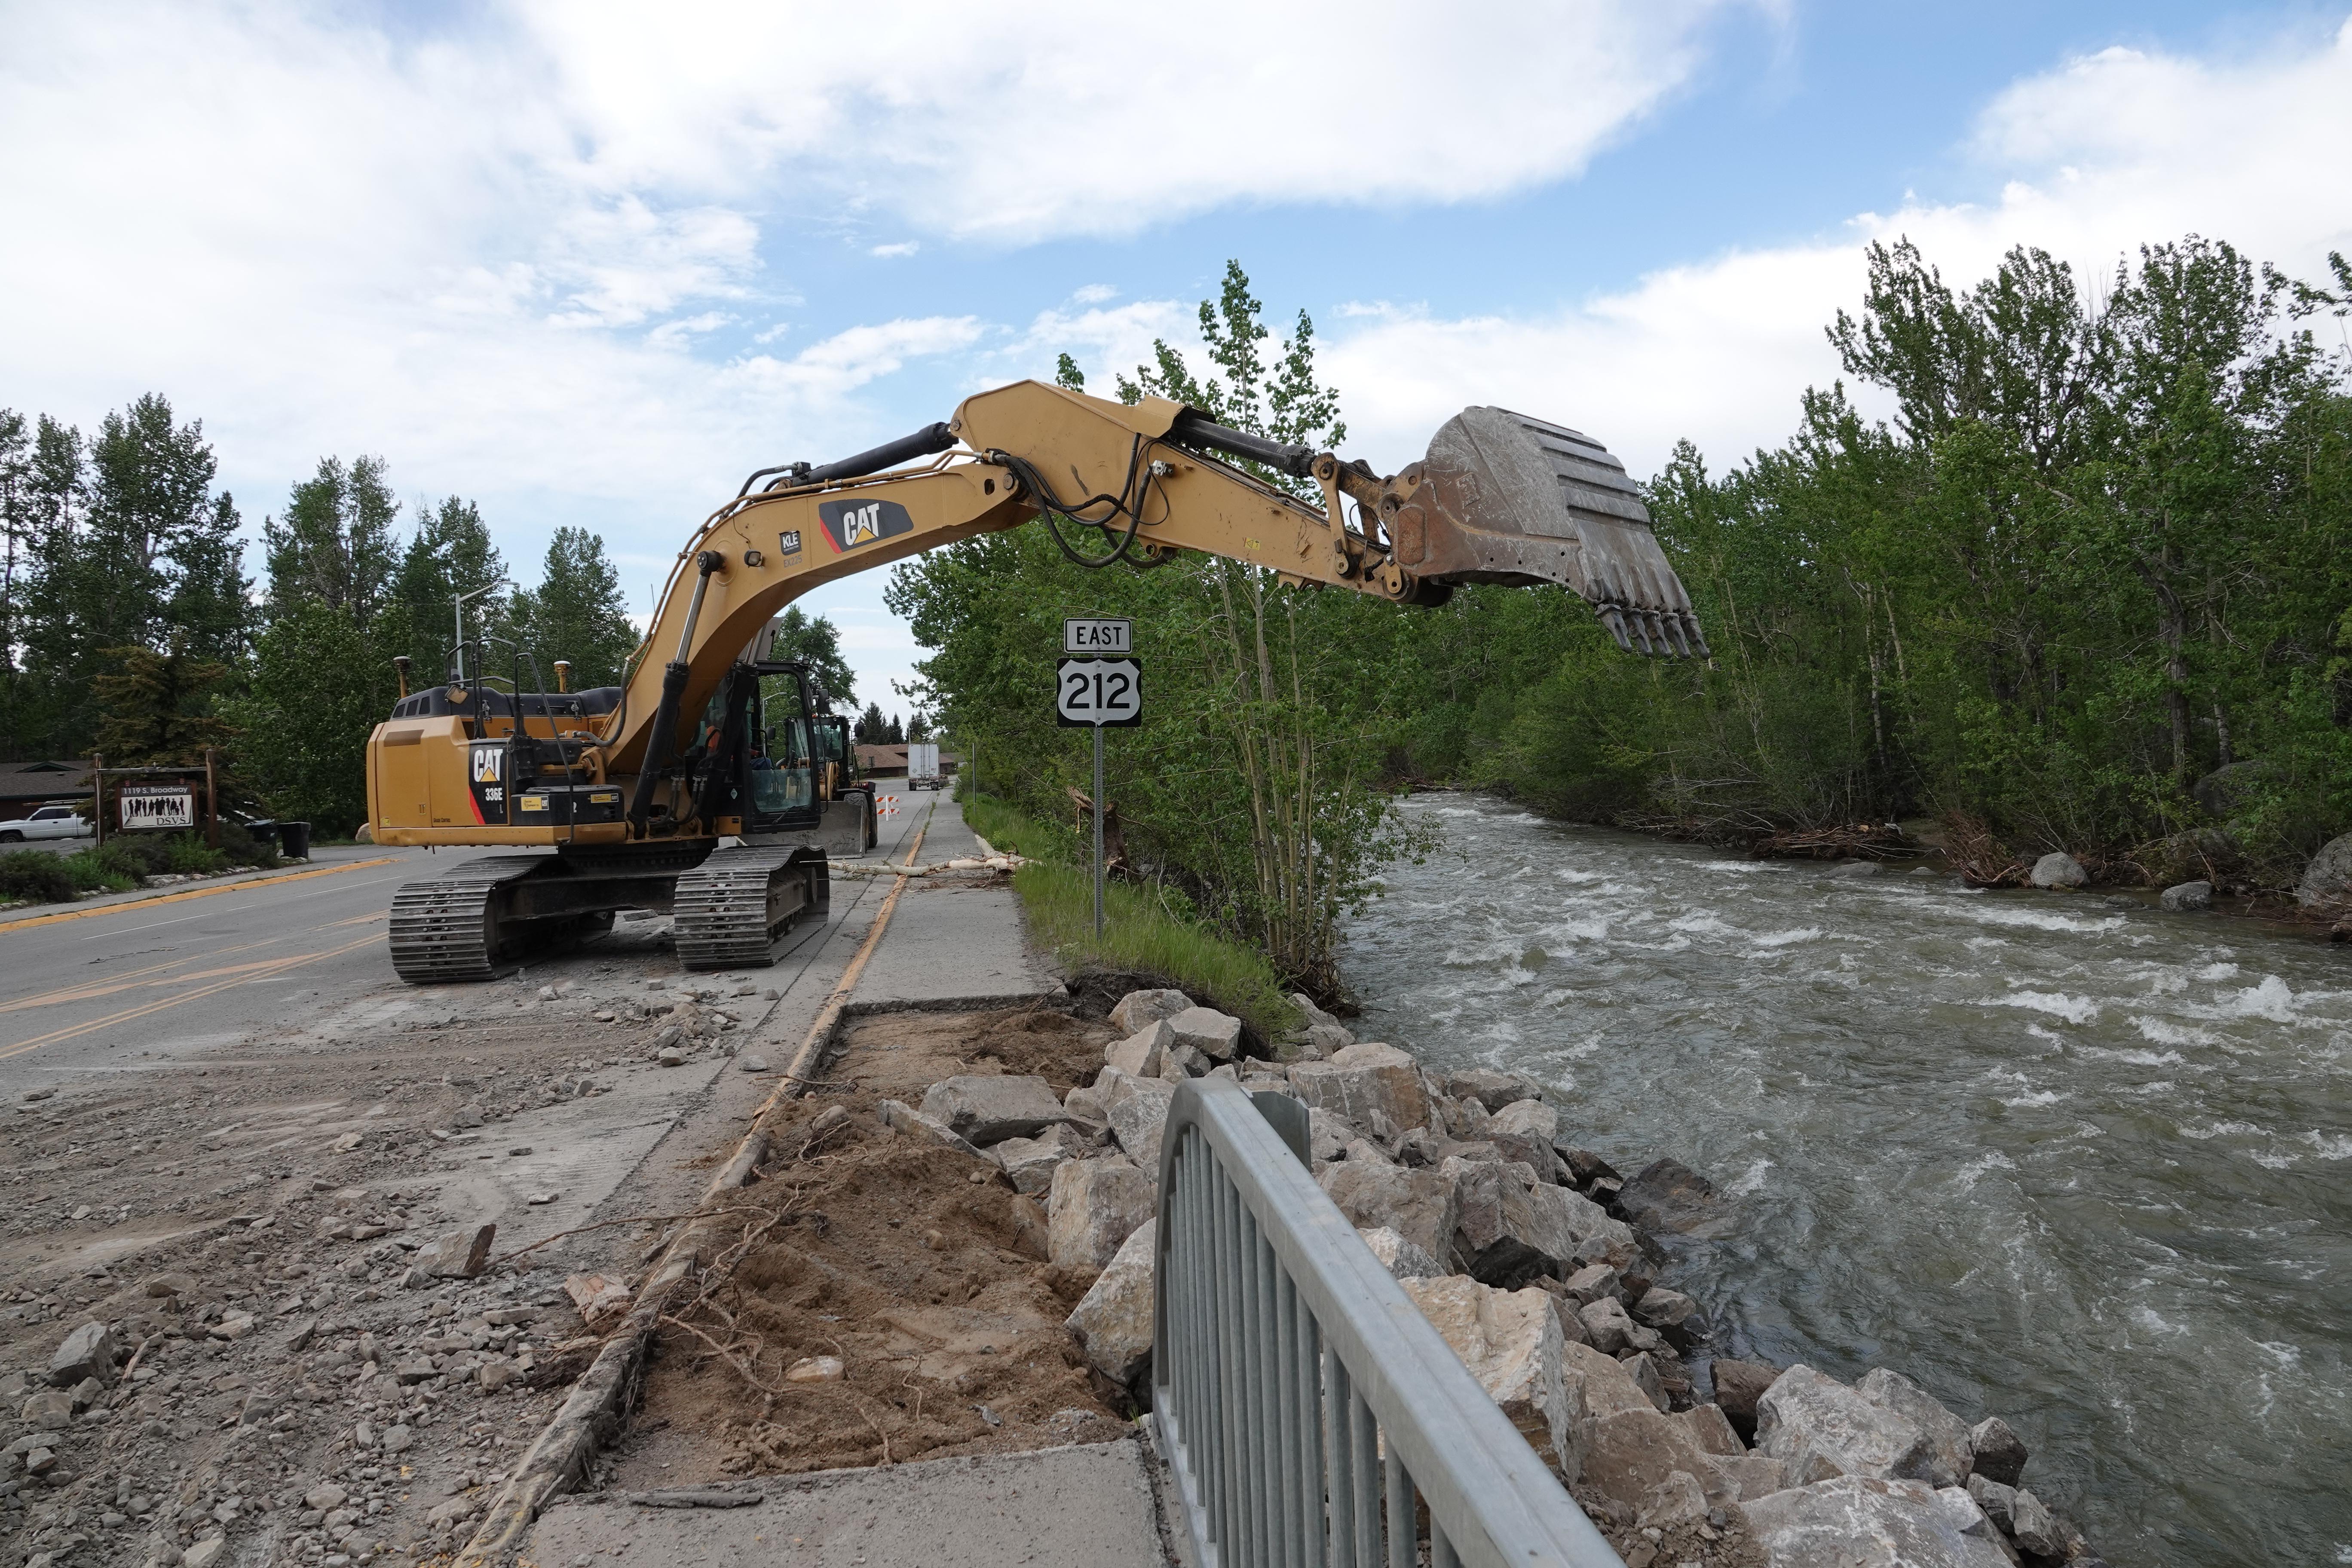 Heavy equipment with bucket in the air on US-212, creek with large rocks, damaged highway edge